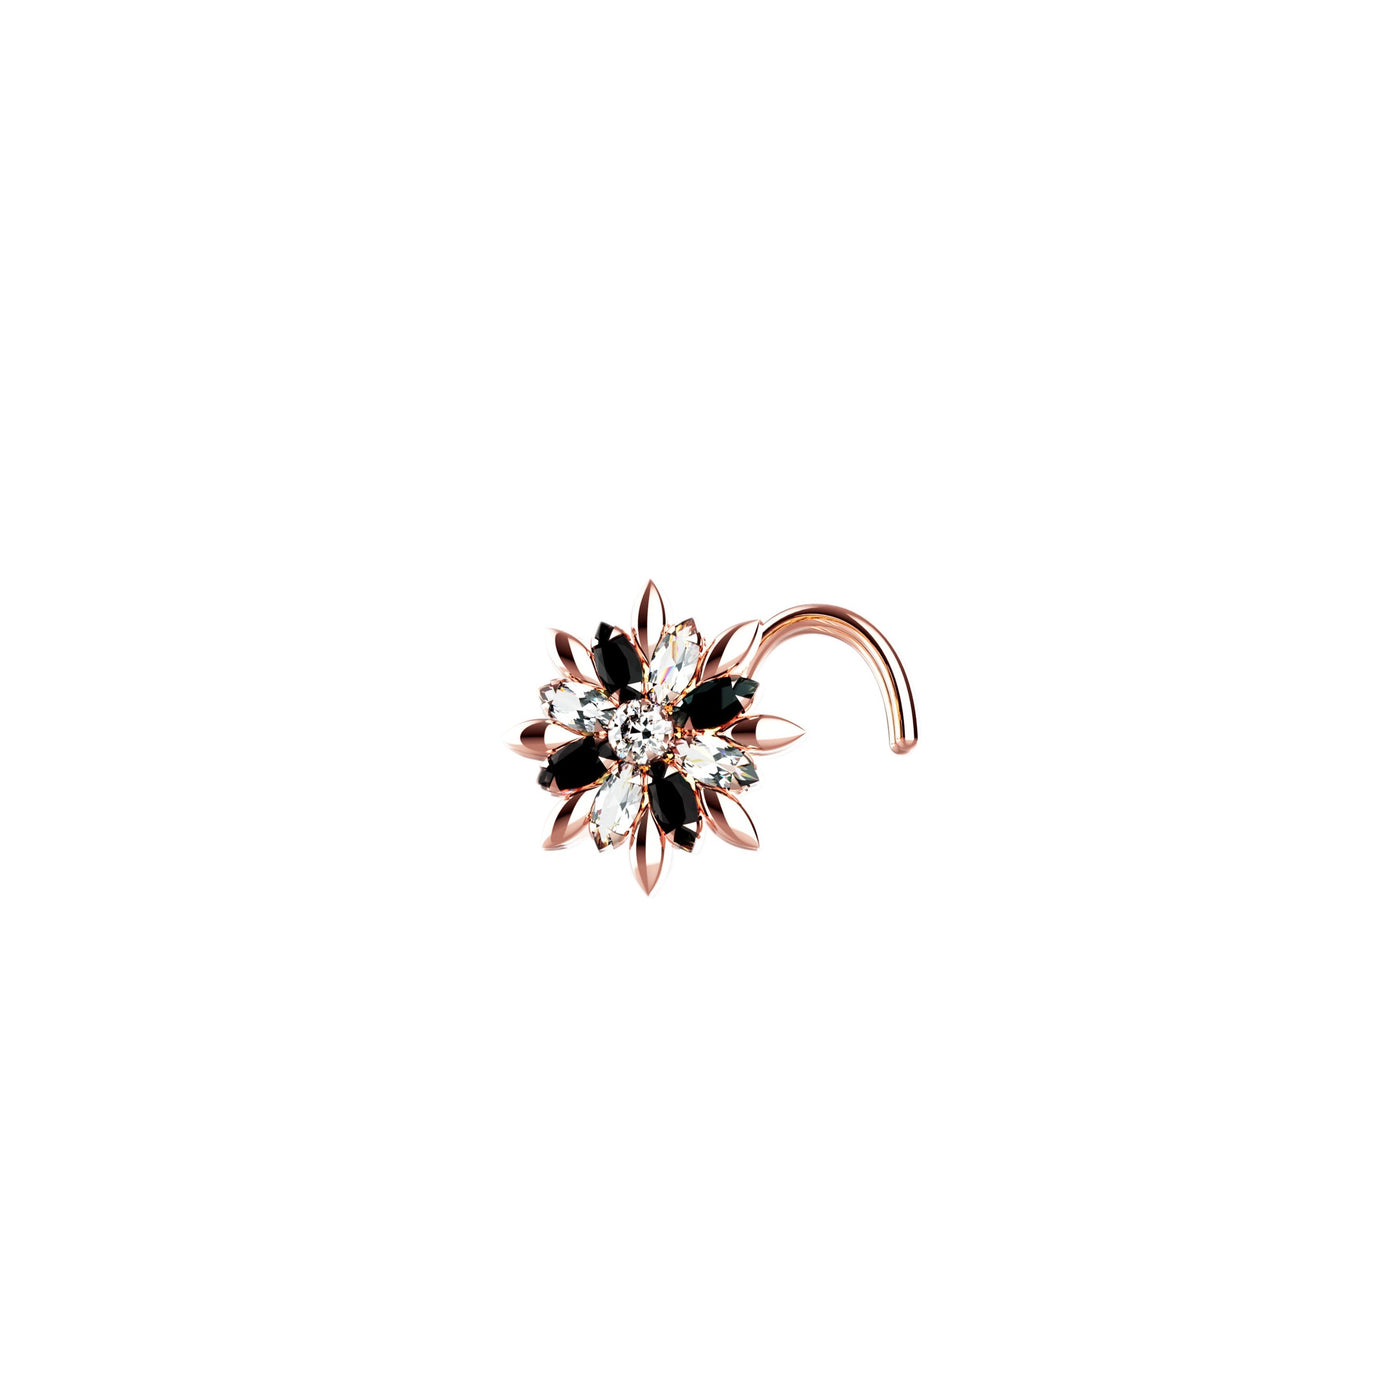 22K Yellow Gold Plated Crystal Clear Flower Nose Stud